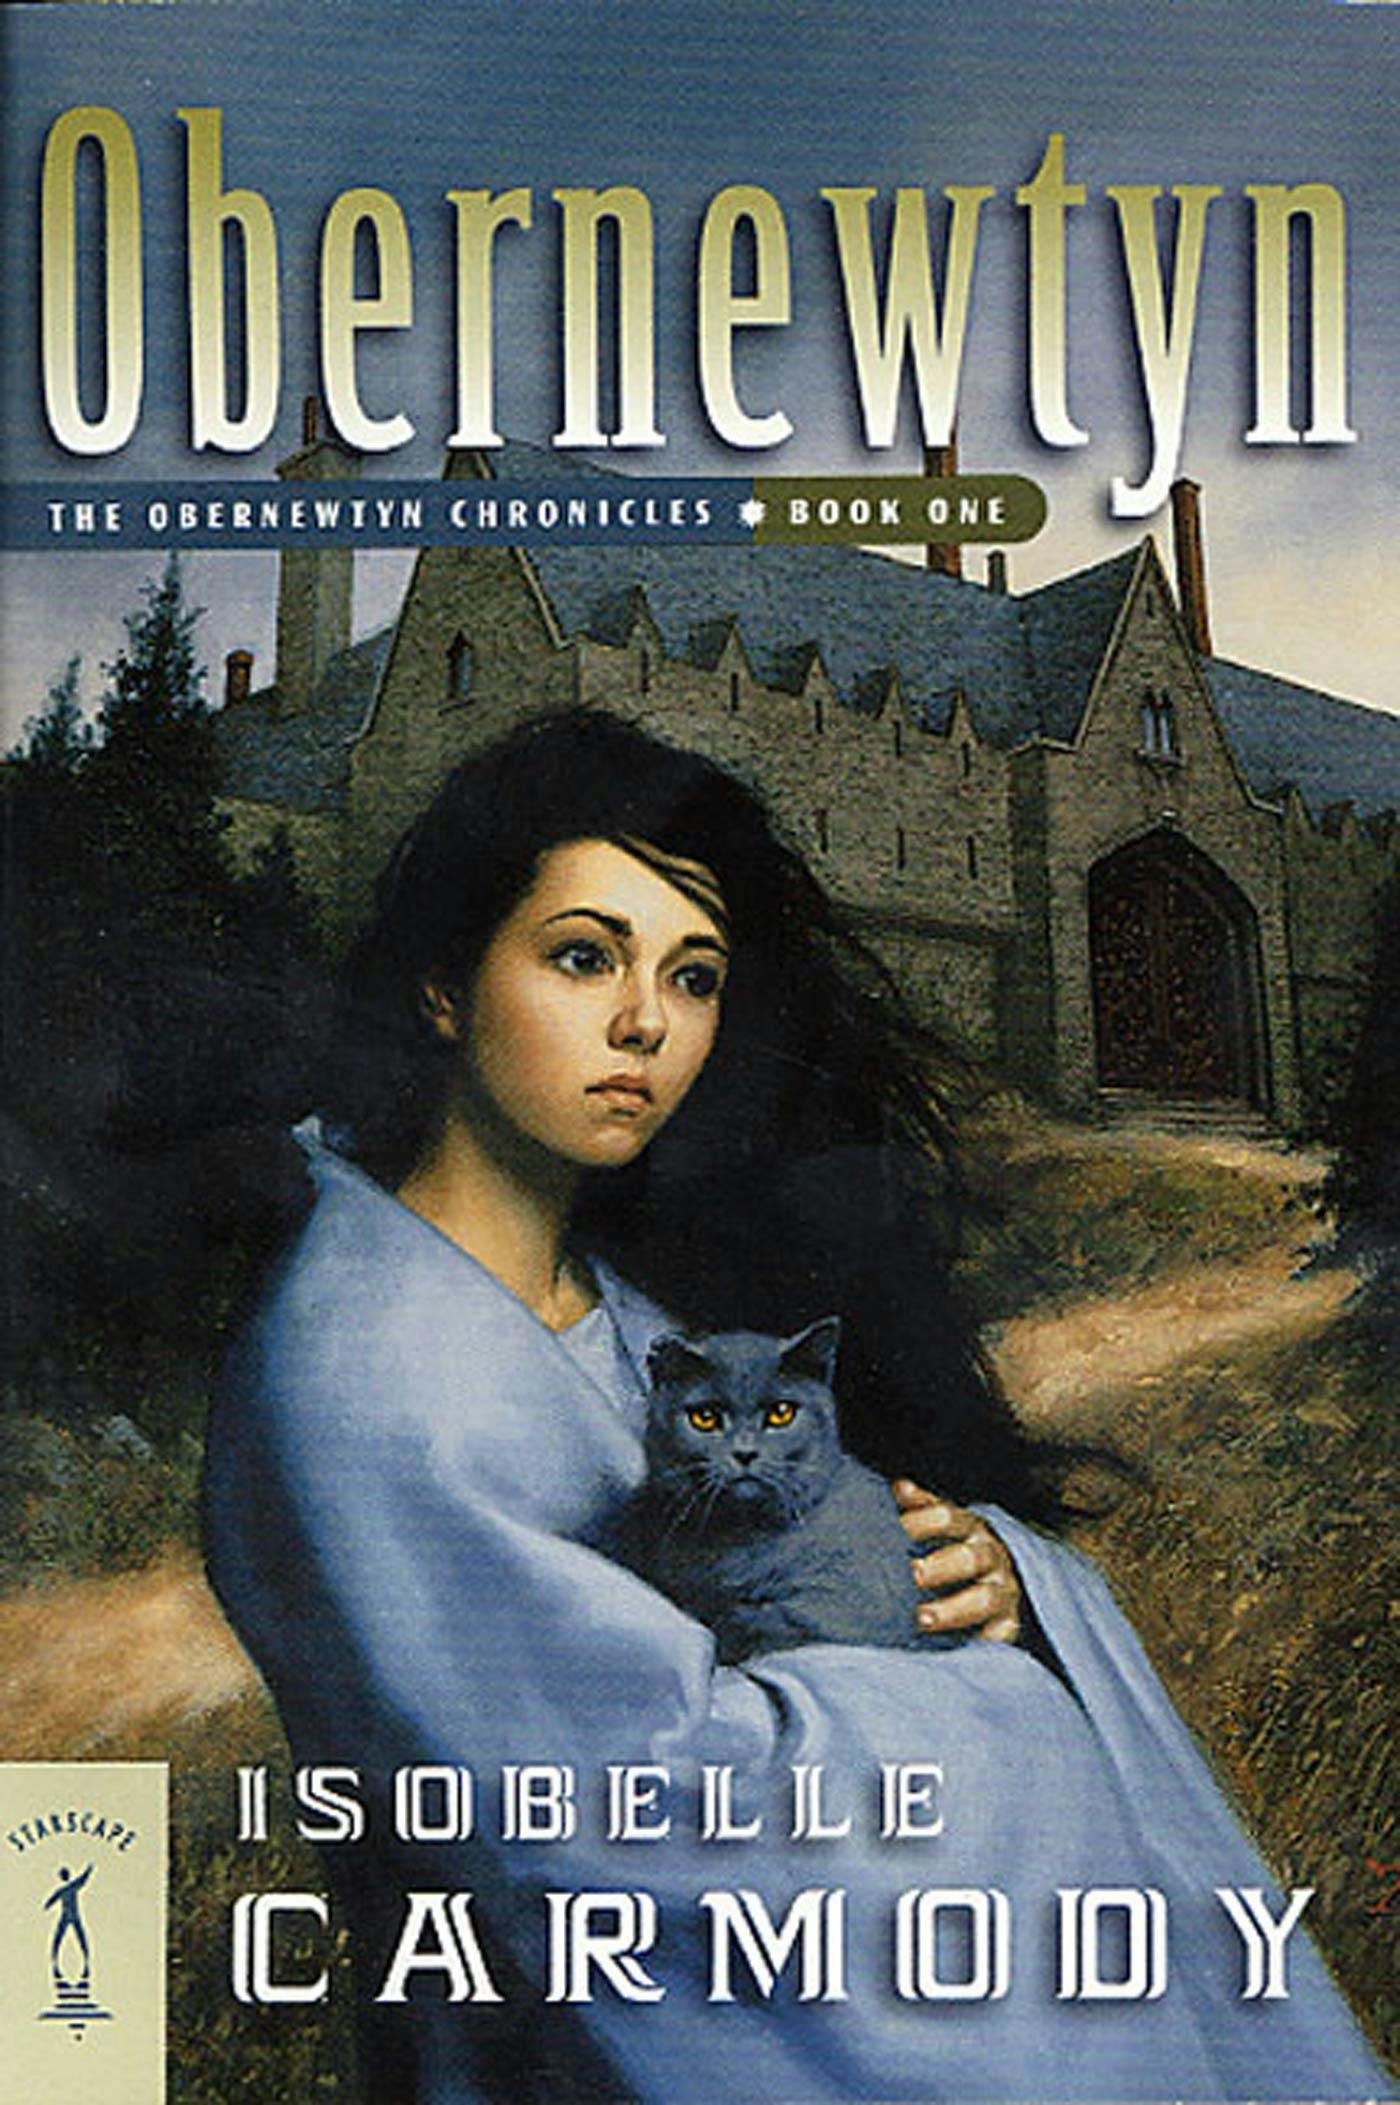 Cover for the book titled as: Obernewtyn